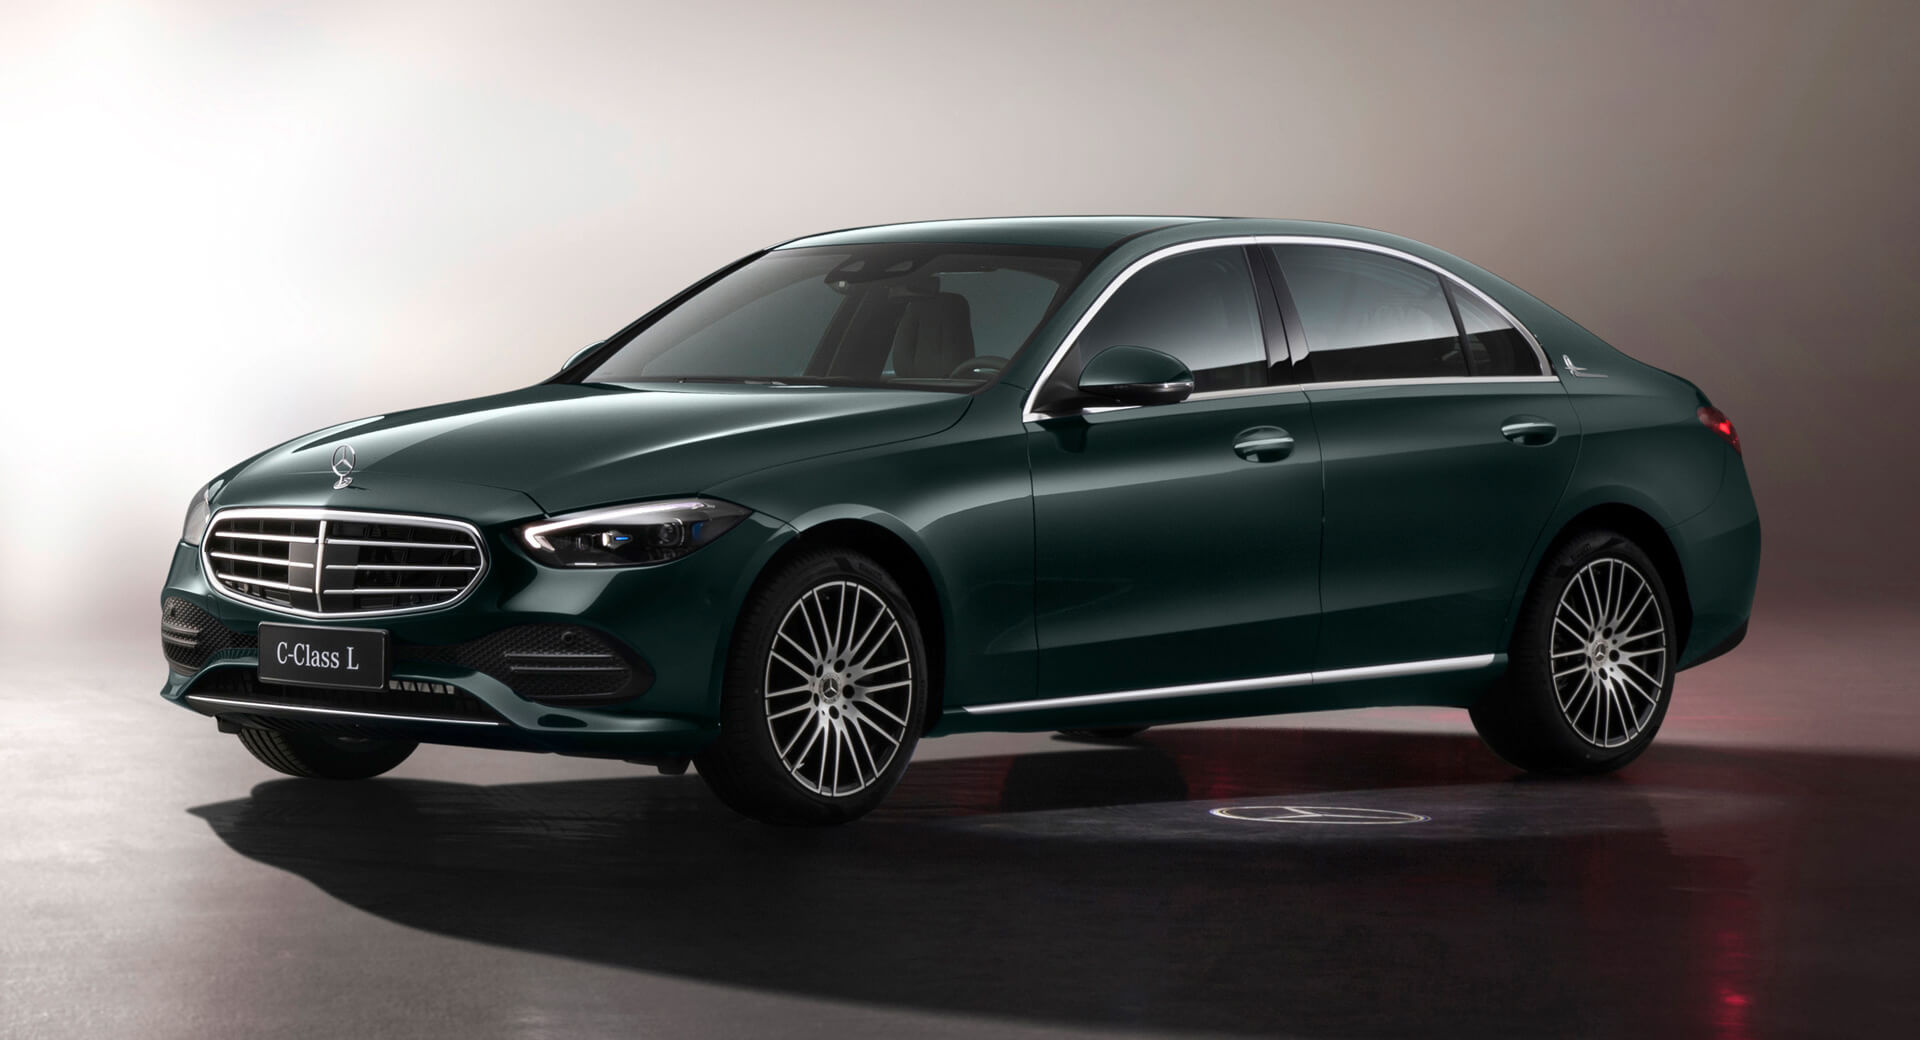 New Mercedes Benz C Class L Is Like A Mini Maybach For China Carscoops